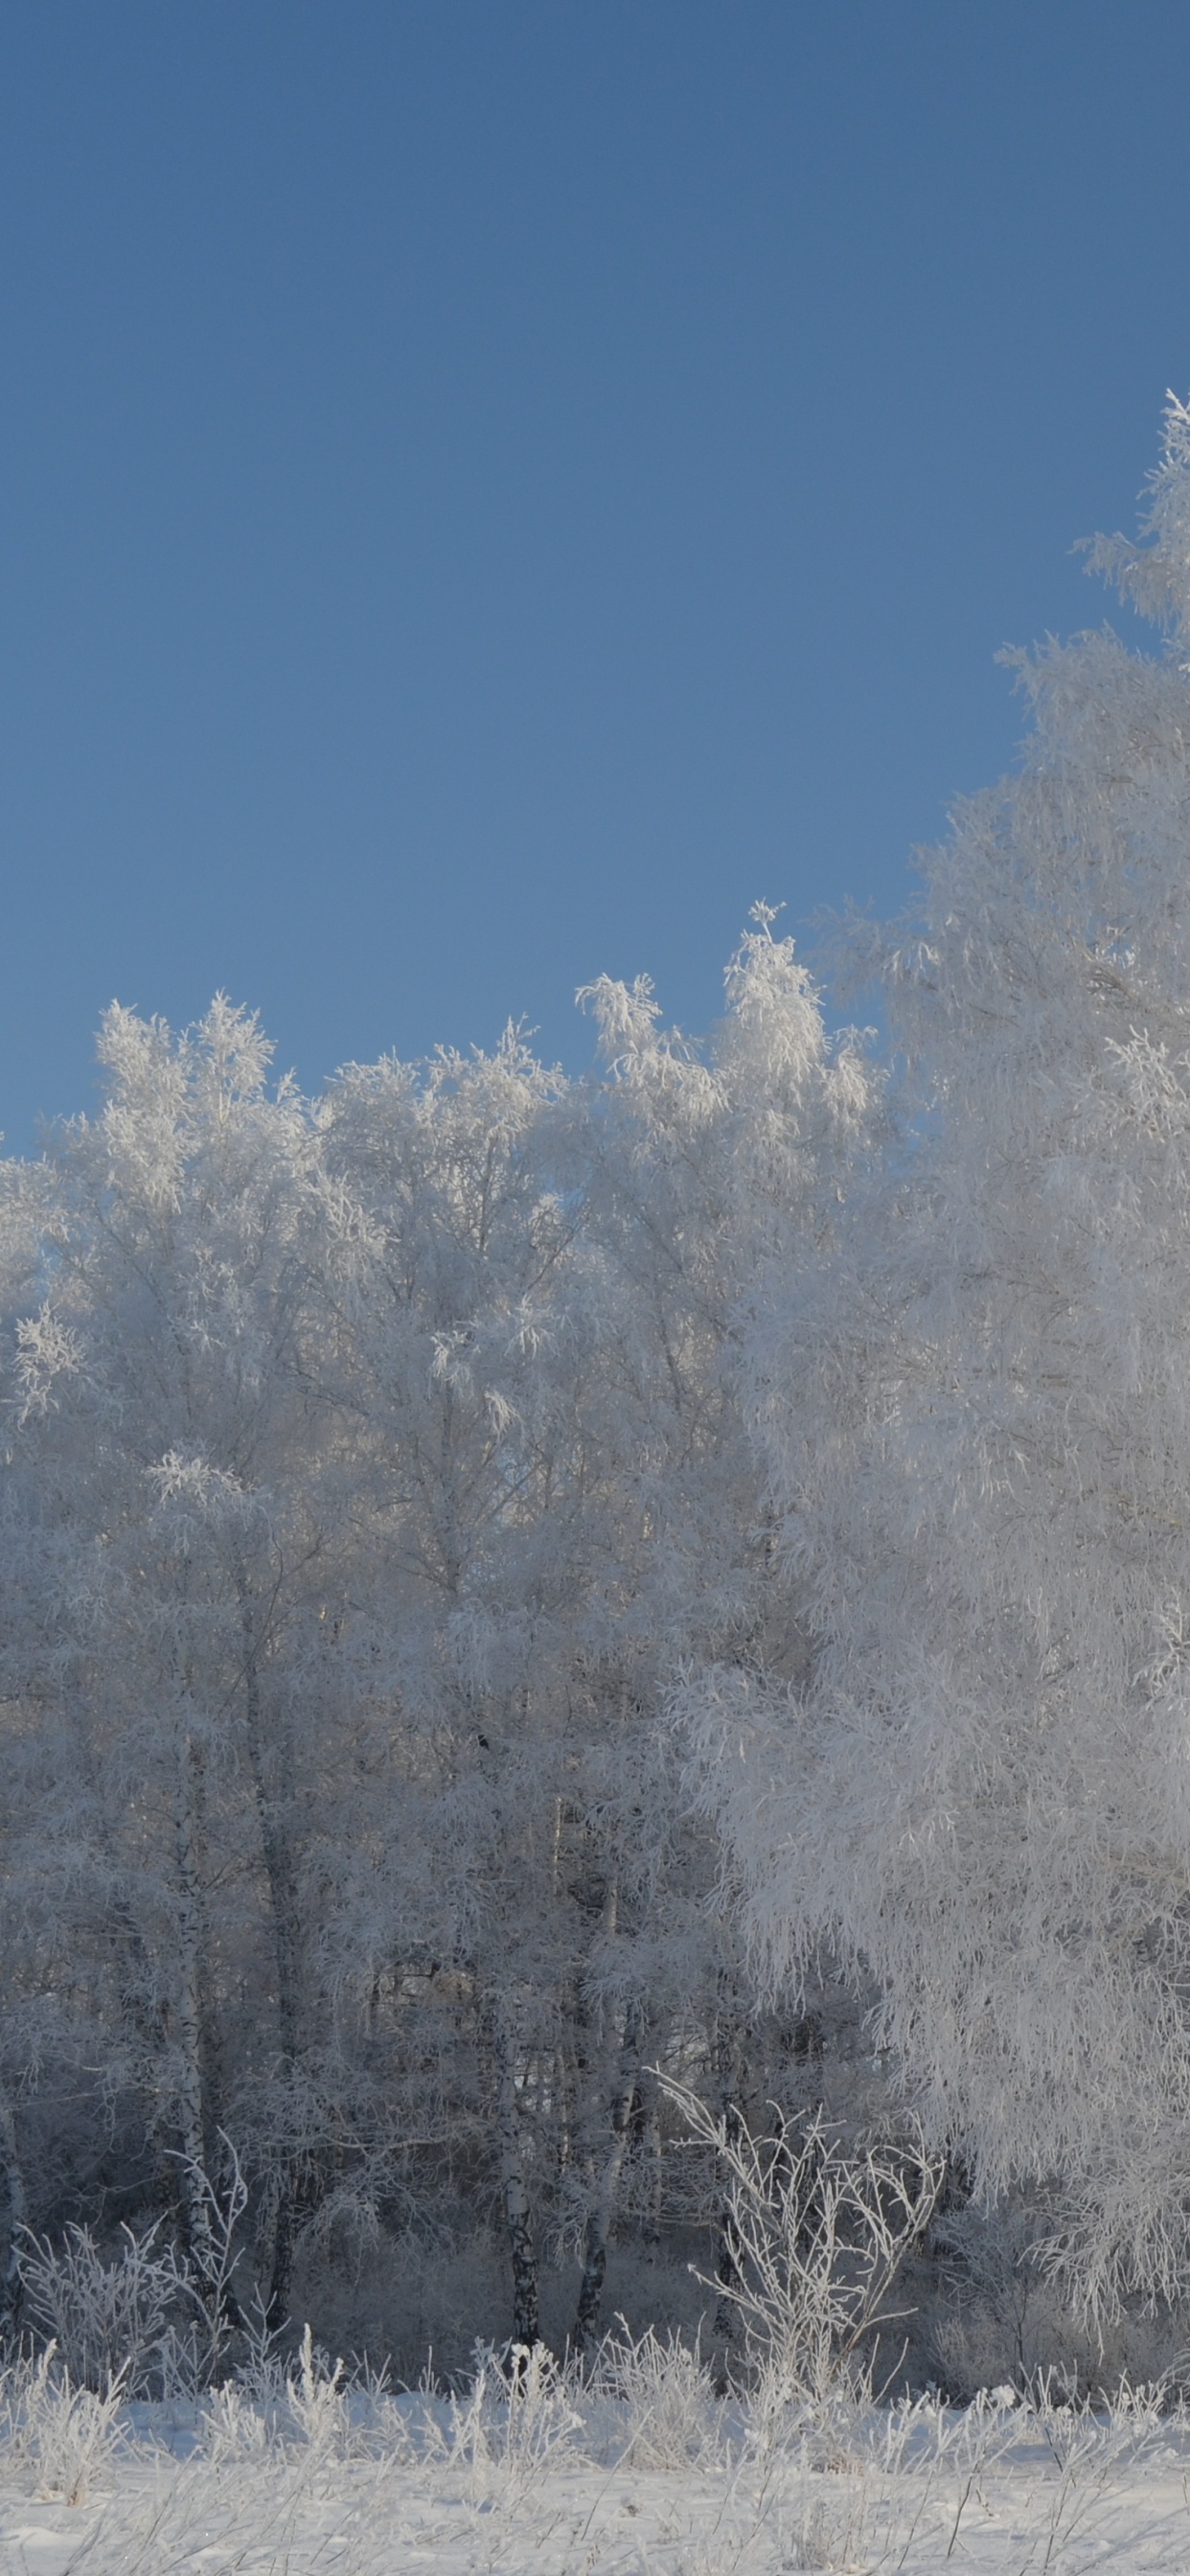 White Trees Covered by Snow During Daytime. Wallpaper in 1242x2688 Resolution